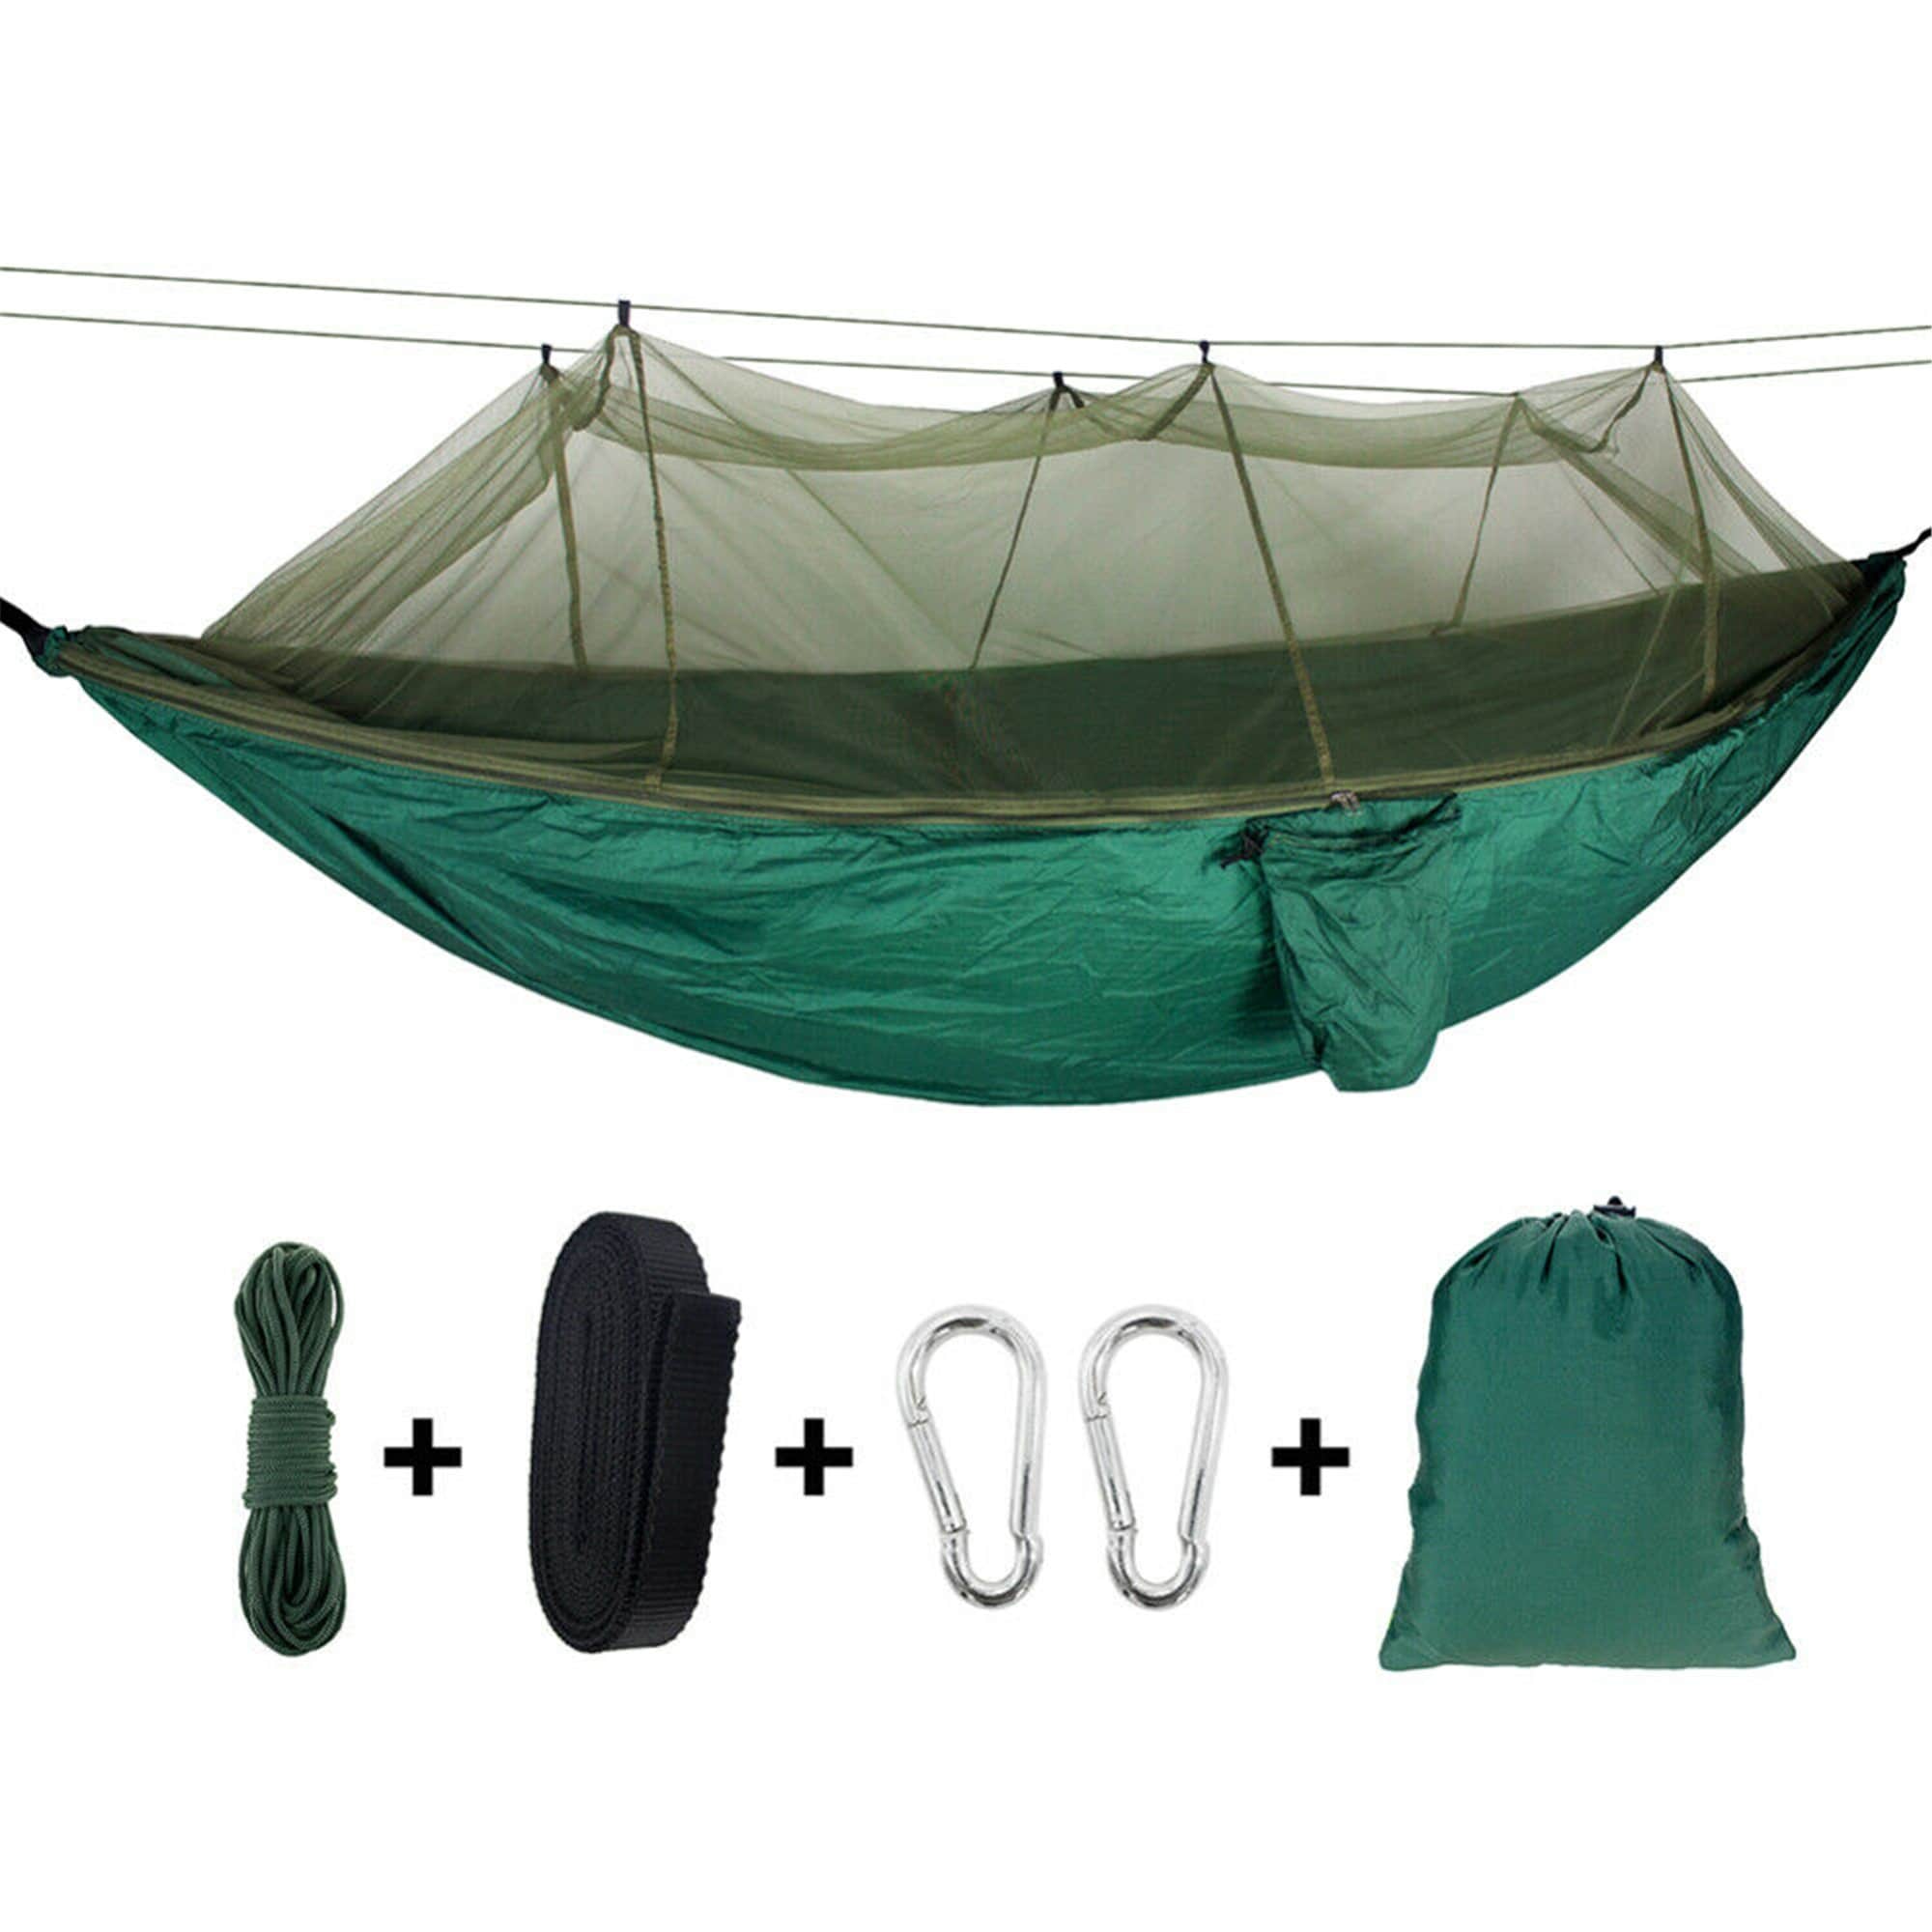 Outdoor Travel Hanging Tent Double Person Camping Hammock Bed with Mosquito Net 